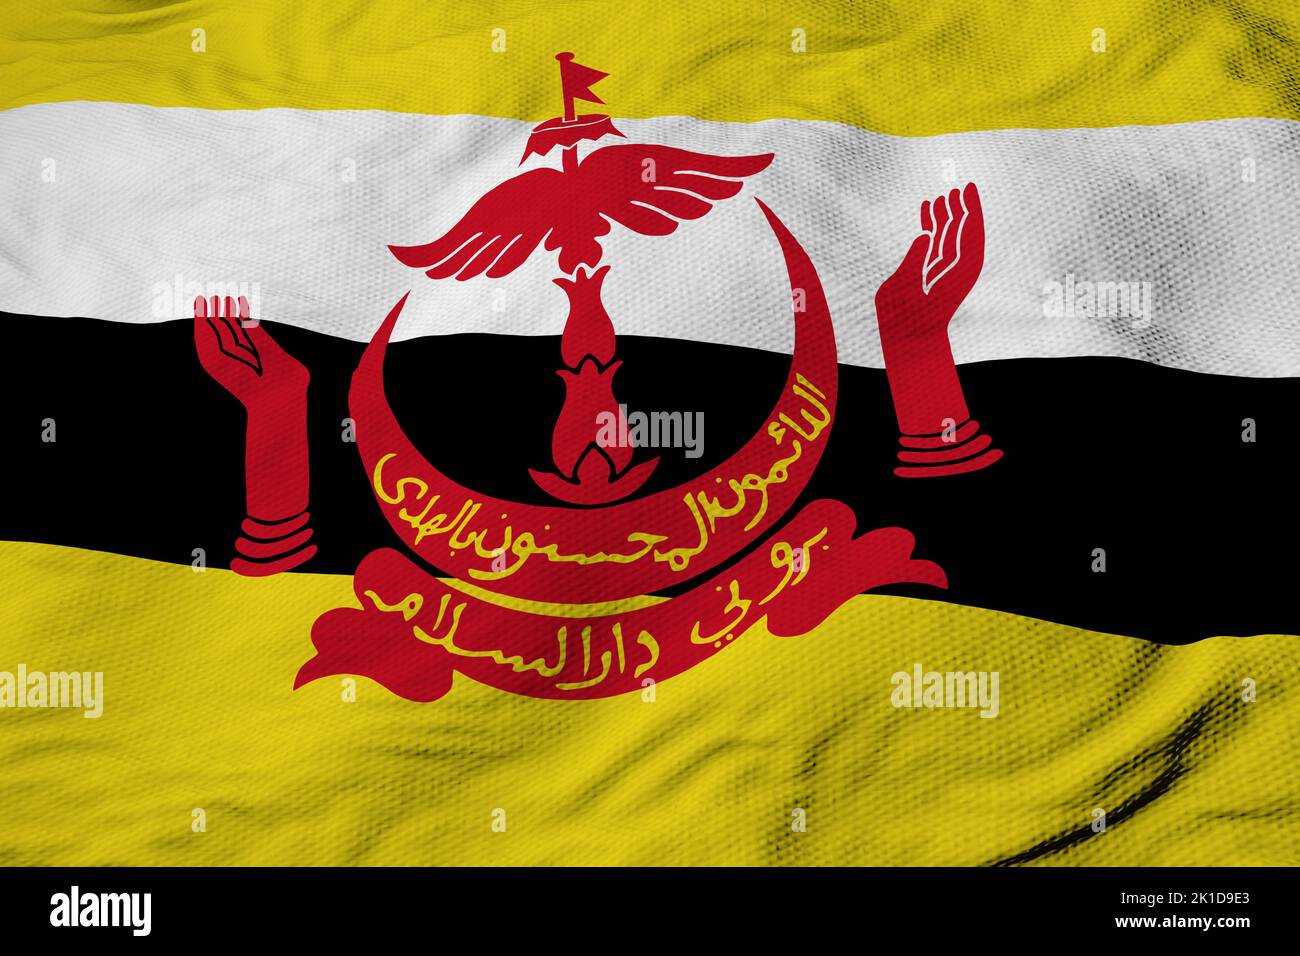 Full frame close-up on a waving Flag of Brunei in 3D rendering. Stock Photo